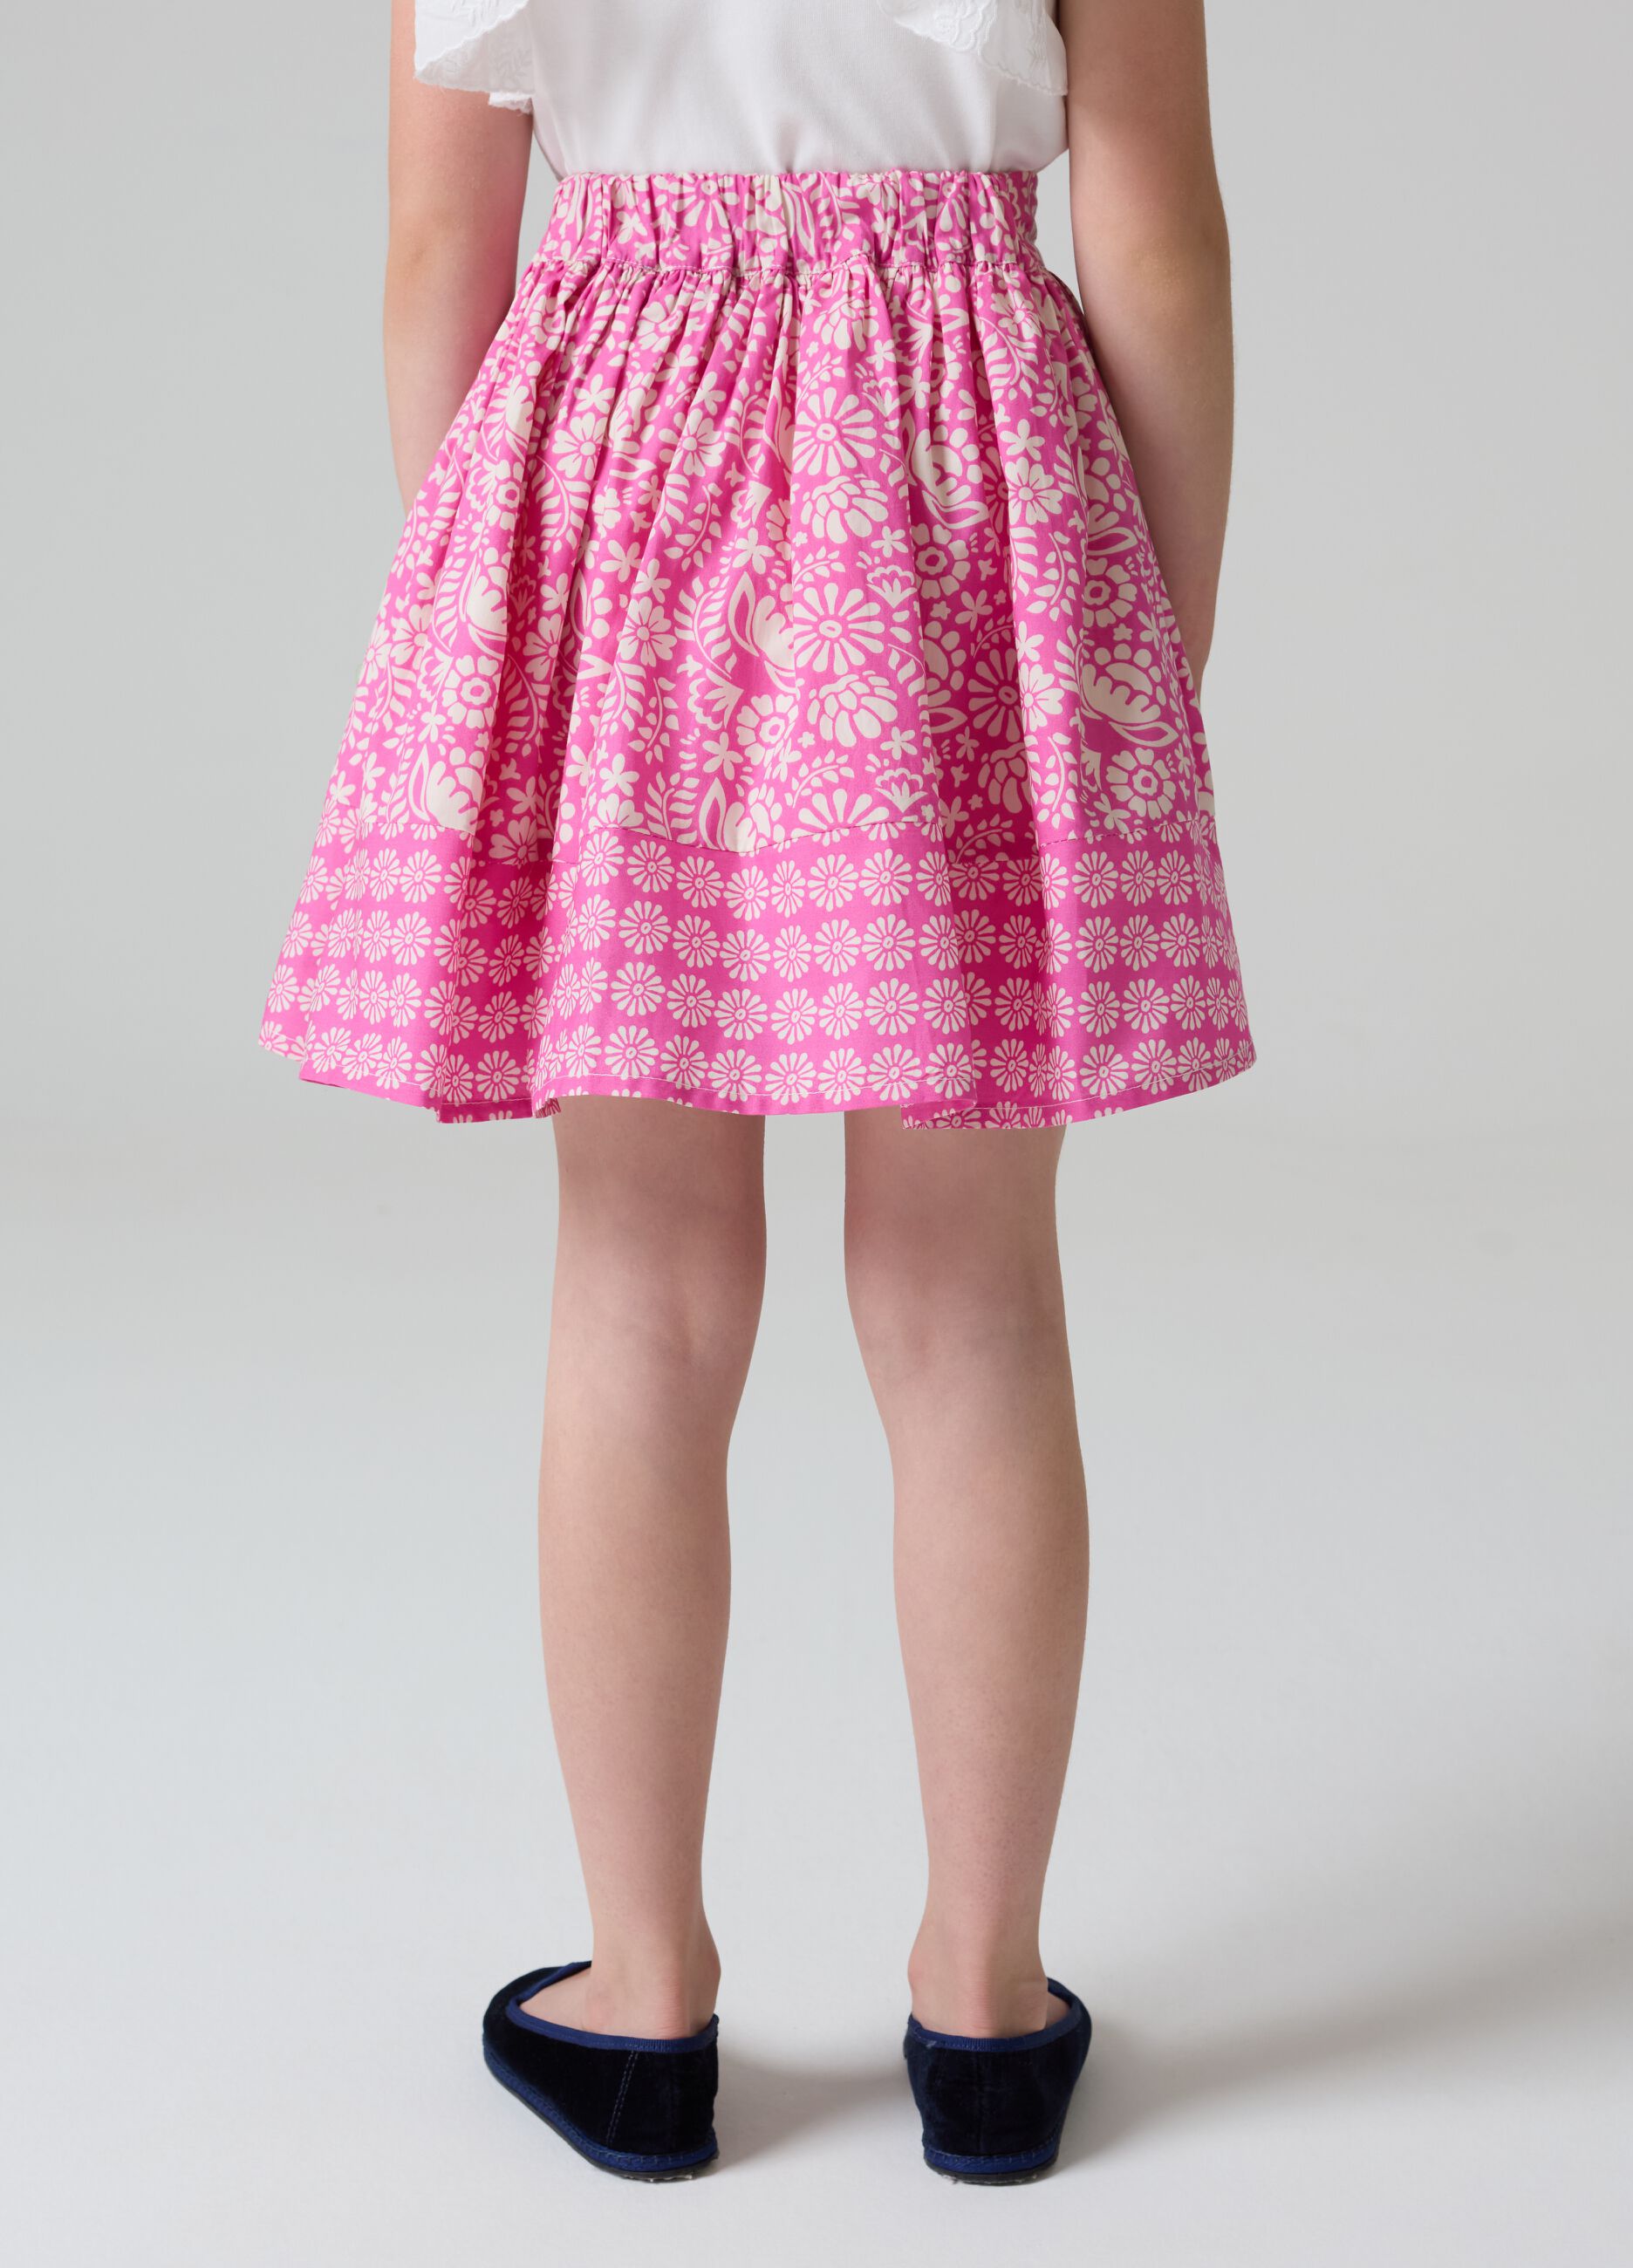 Skirt with floral pattern